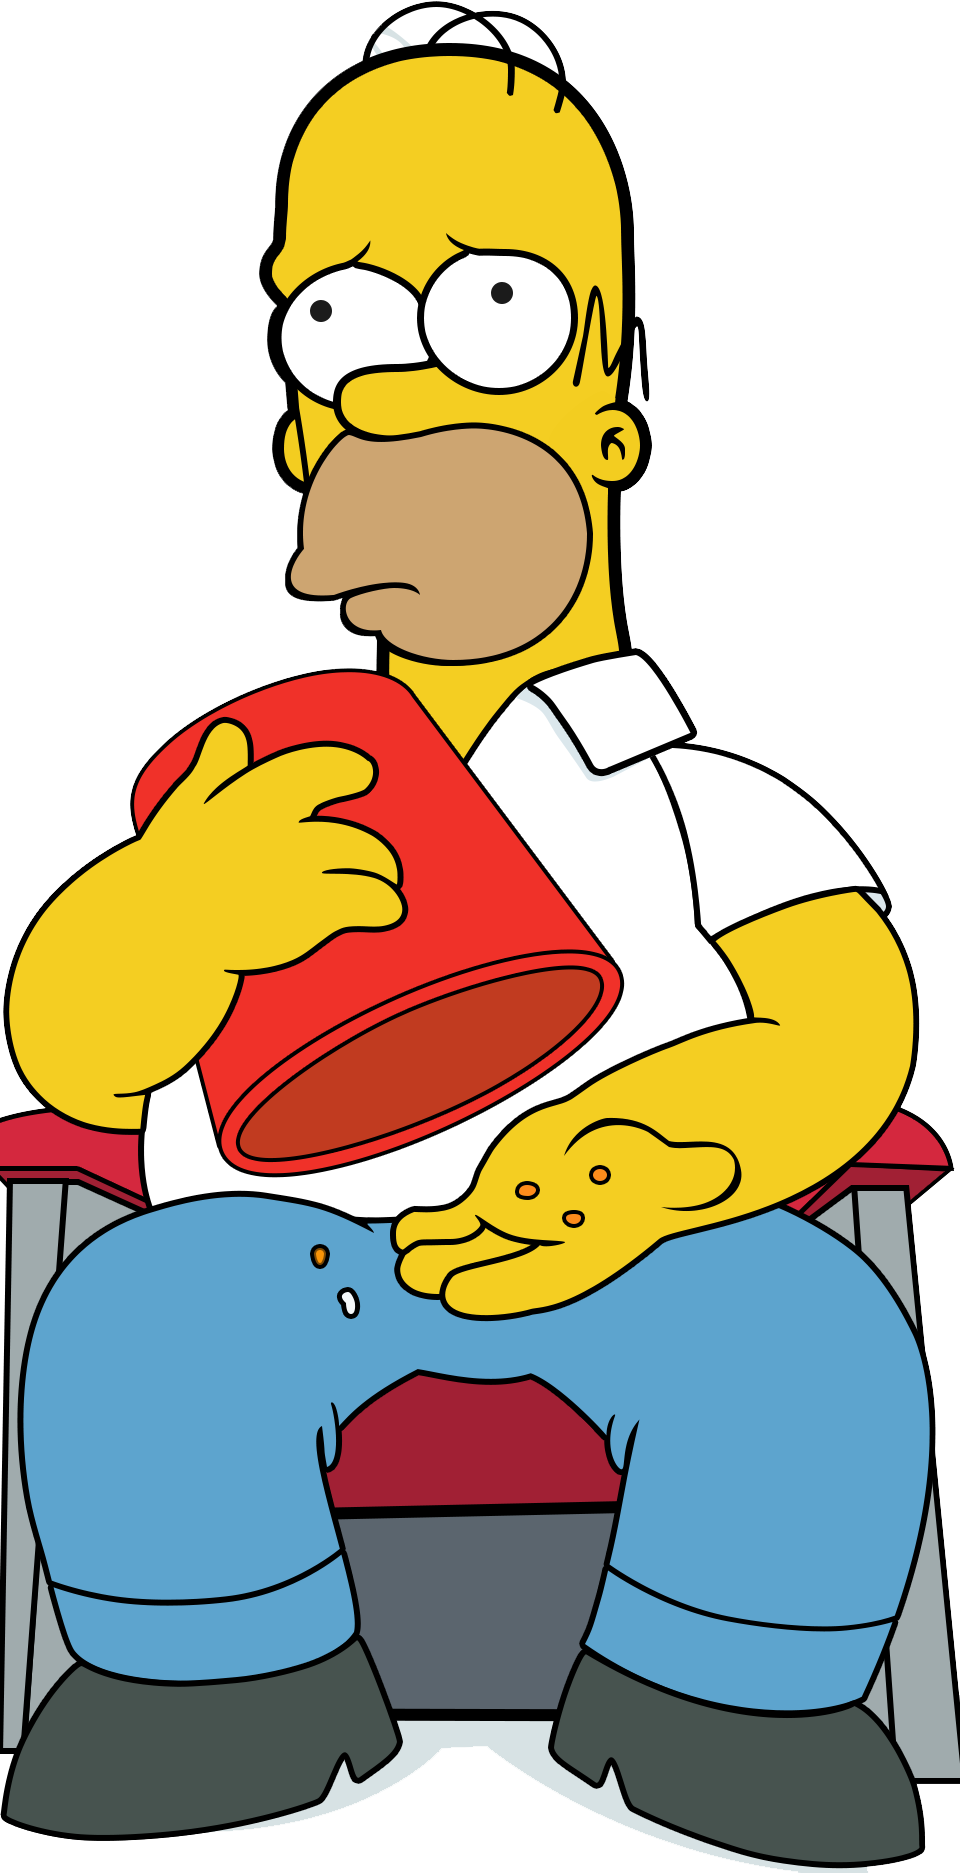 The Simpsons Movie Photos PNG Image